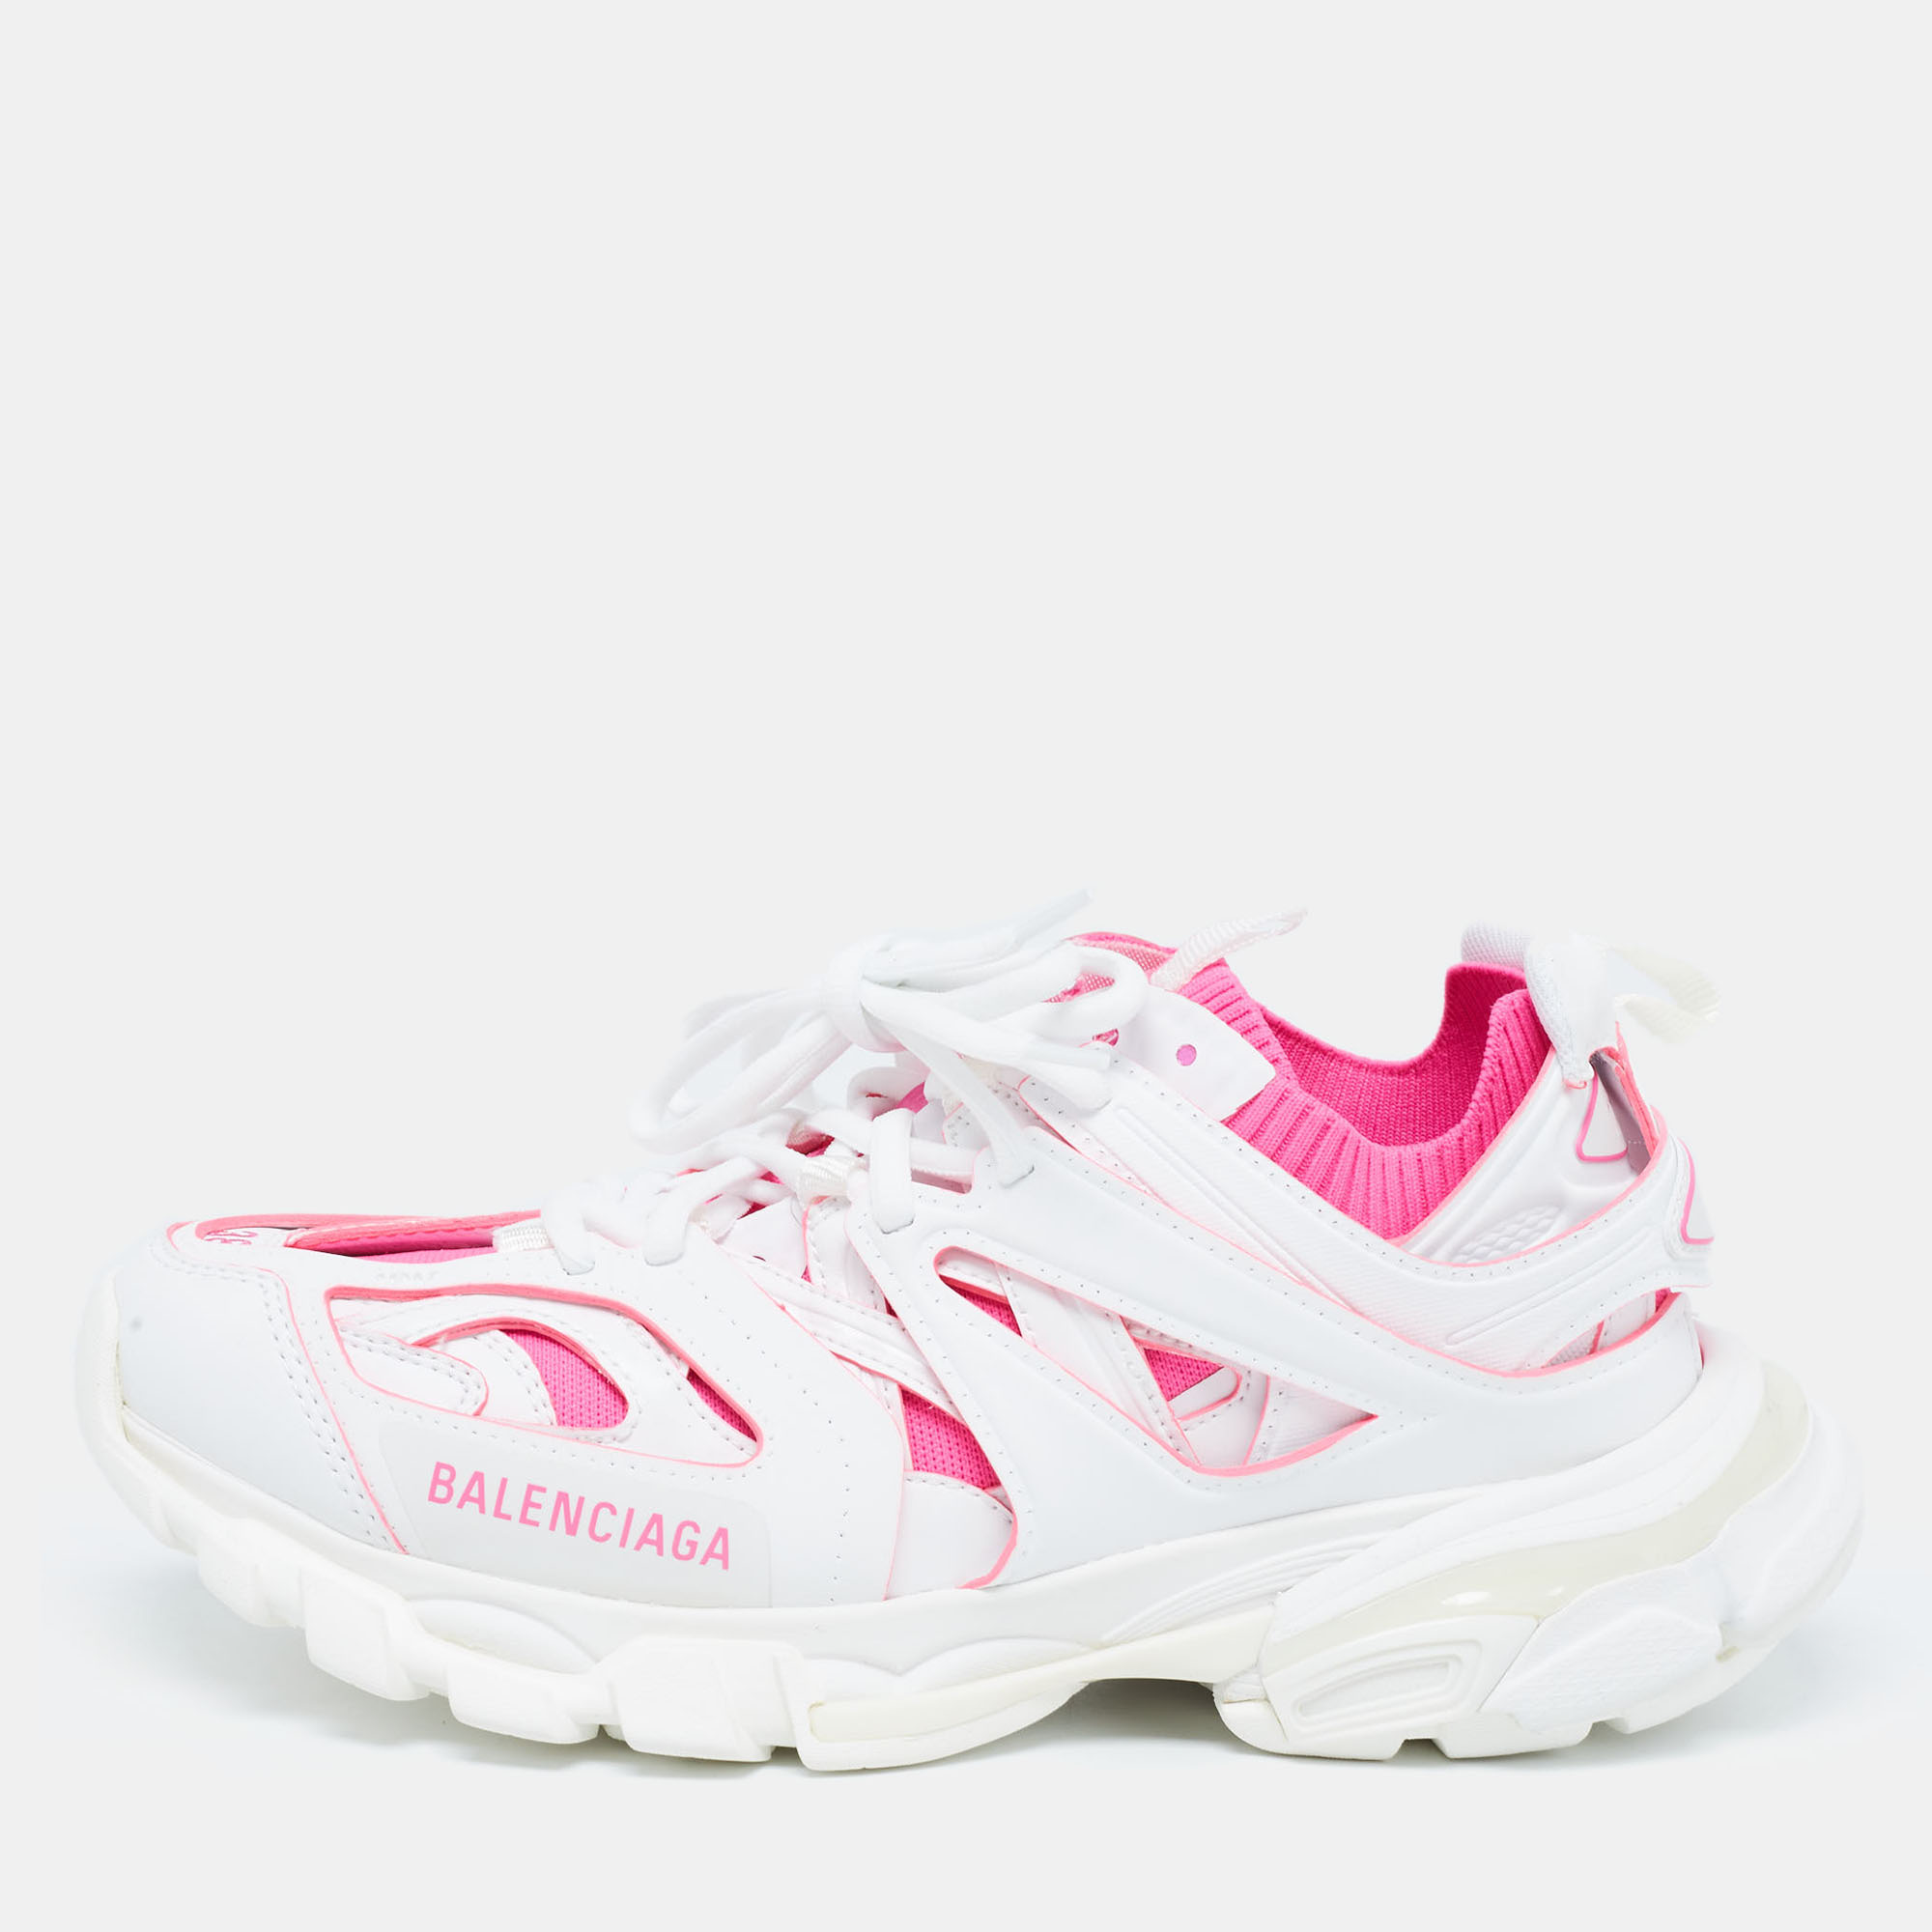 Balenciaga white/pink rubber and knit fabric track sneakers size 38